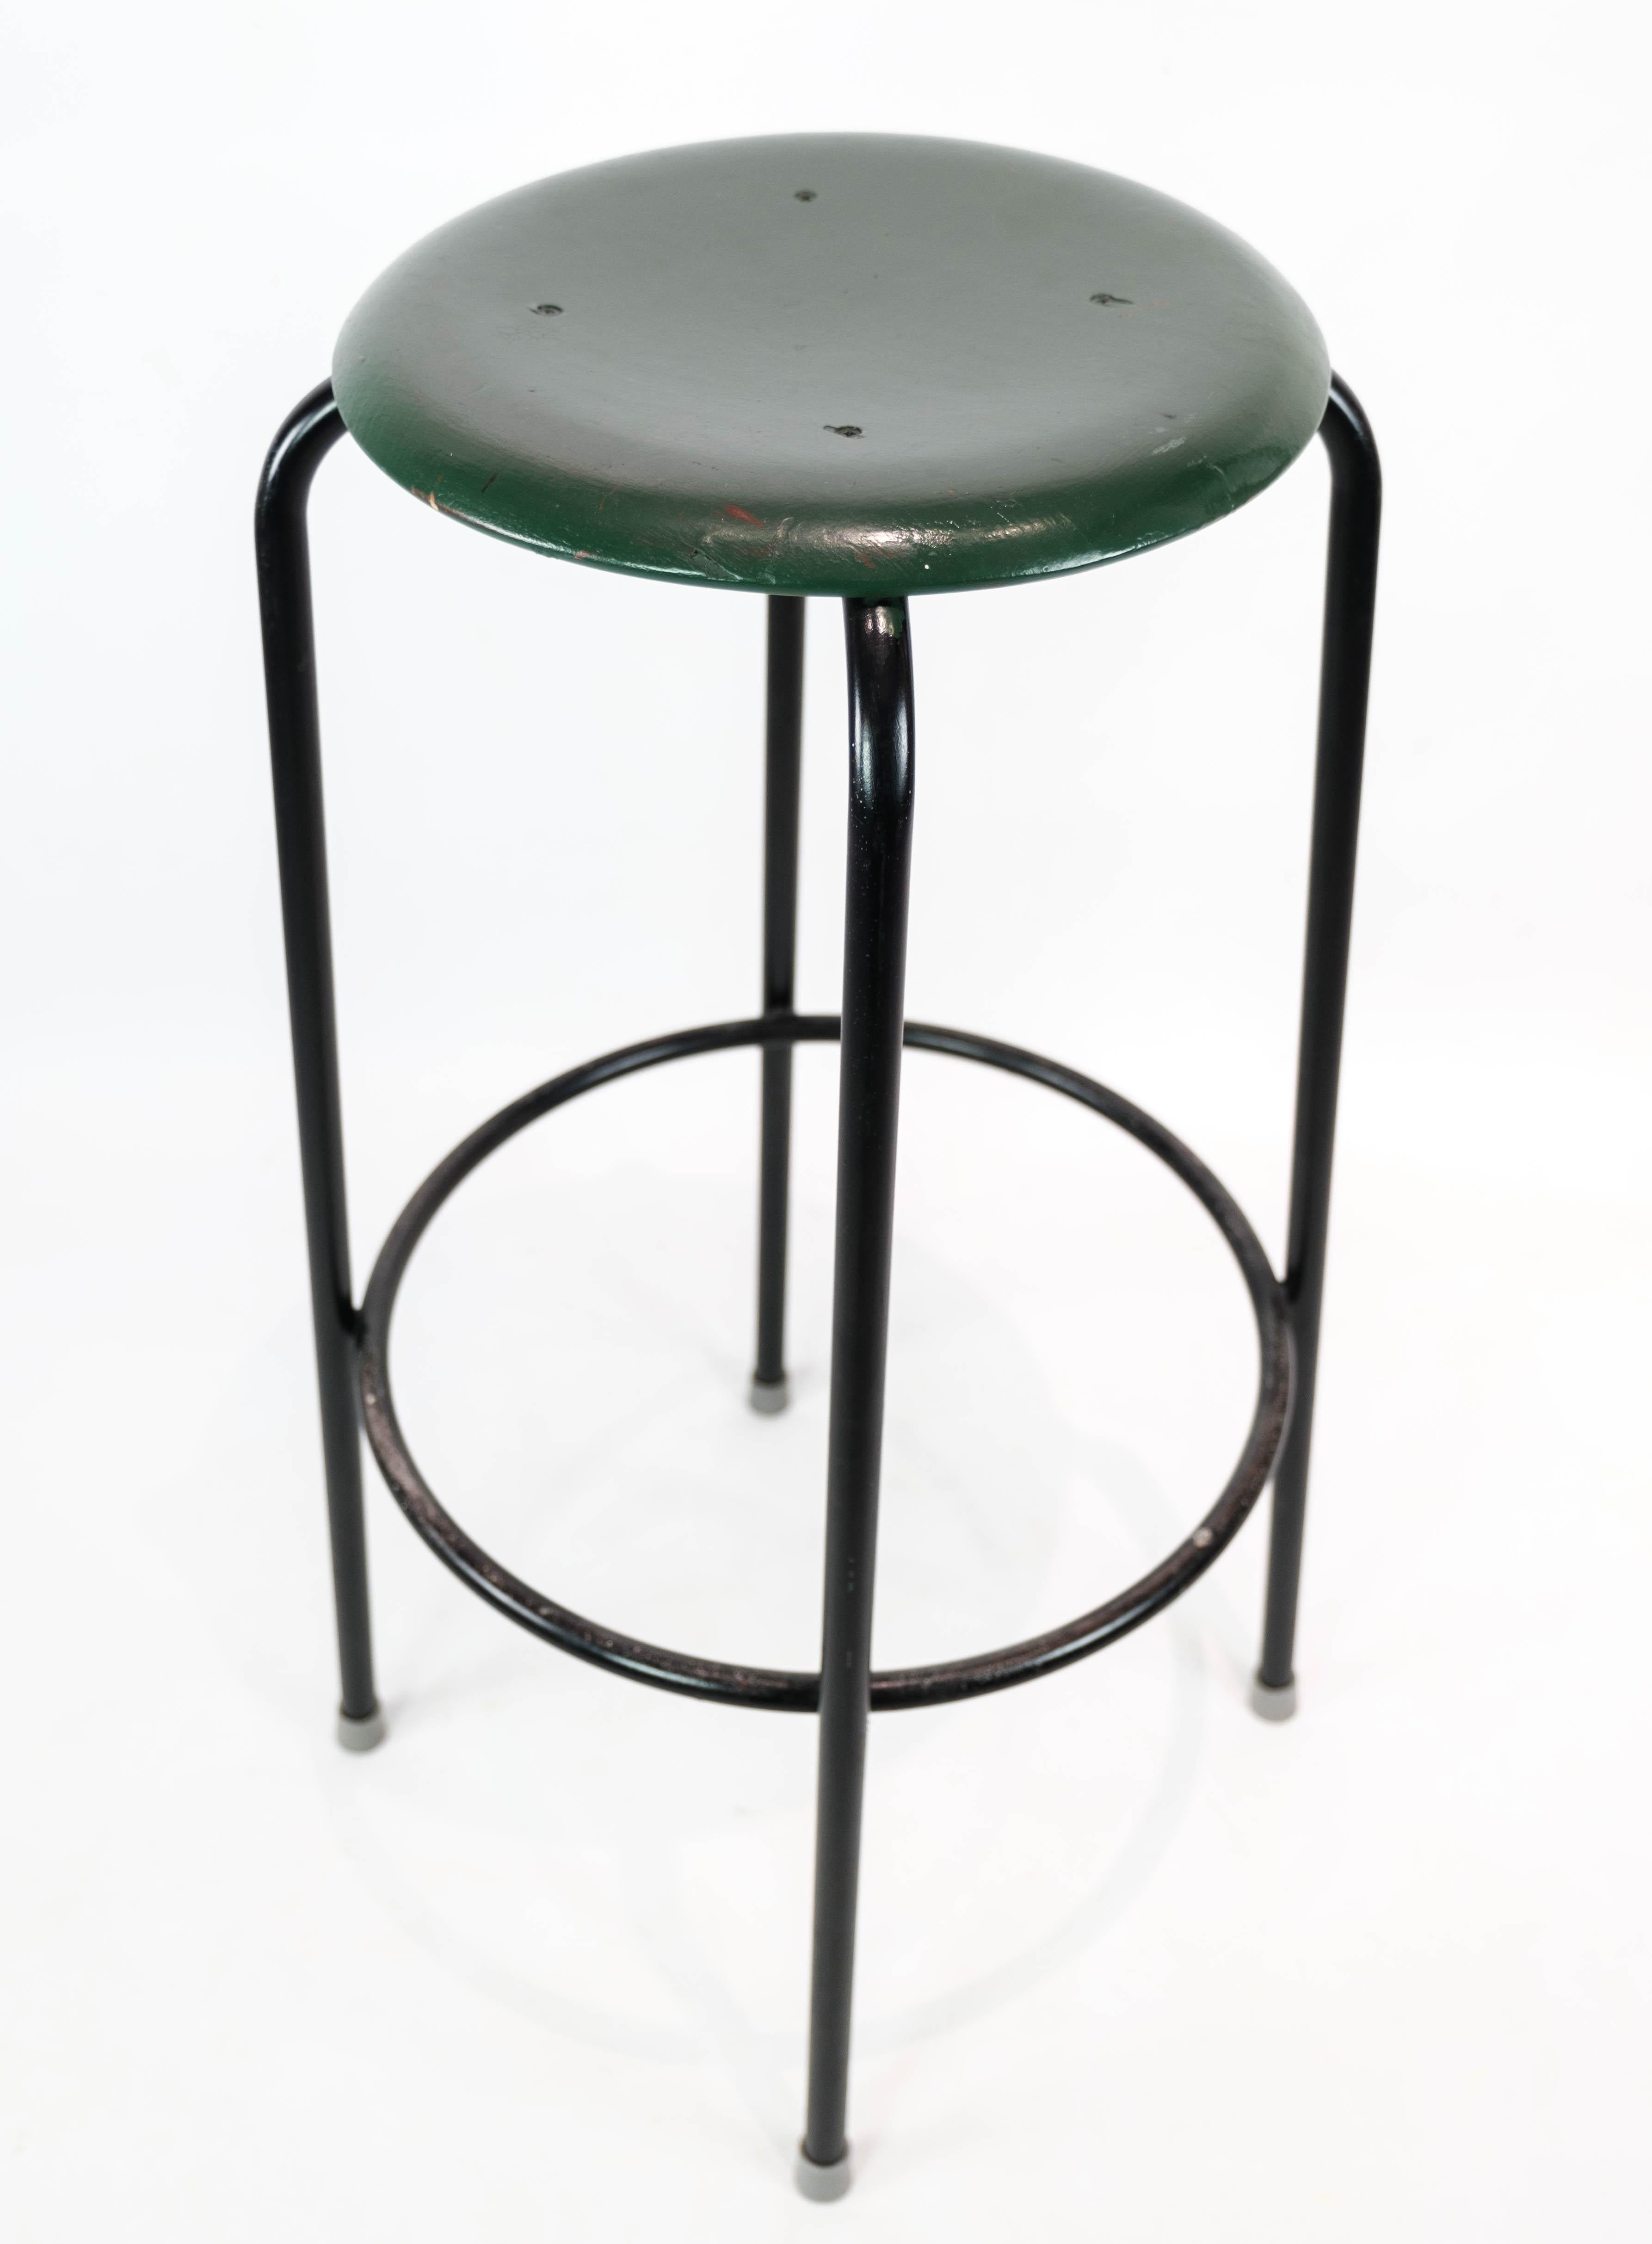 Lacquered Tall Dot Stool in Dark Green by Arne Jacobsen and Fritz Hansen, 1950s